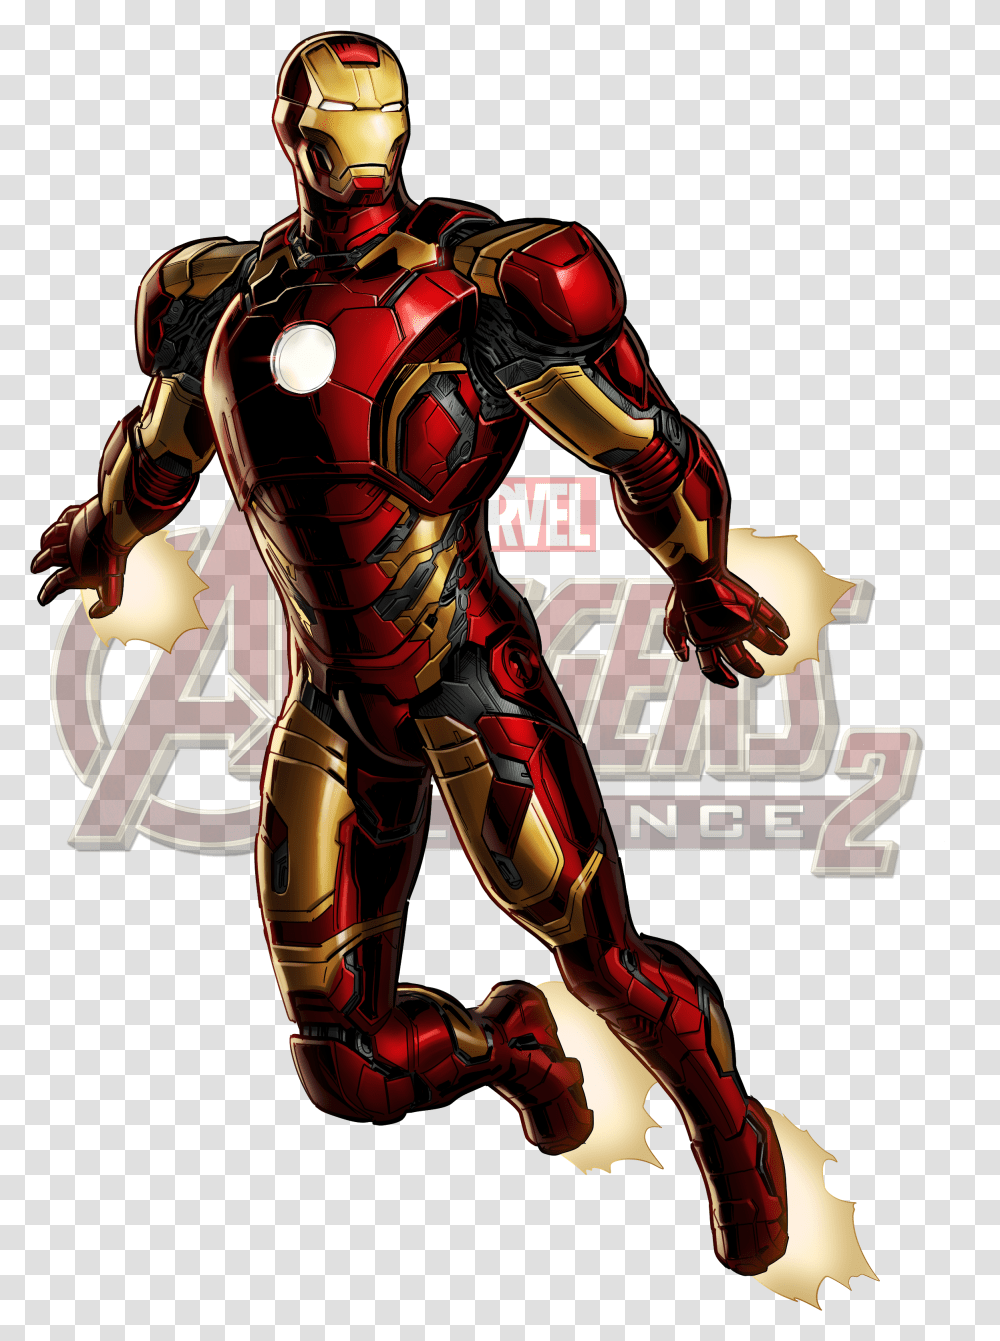 Avengers Alliance 2 Wikia Iron Man Flying, Helmet, Apparel, Person Transparent Png